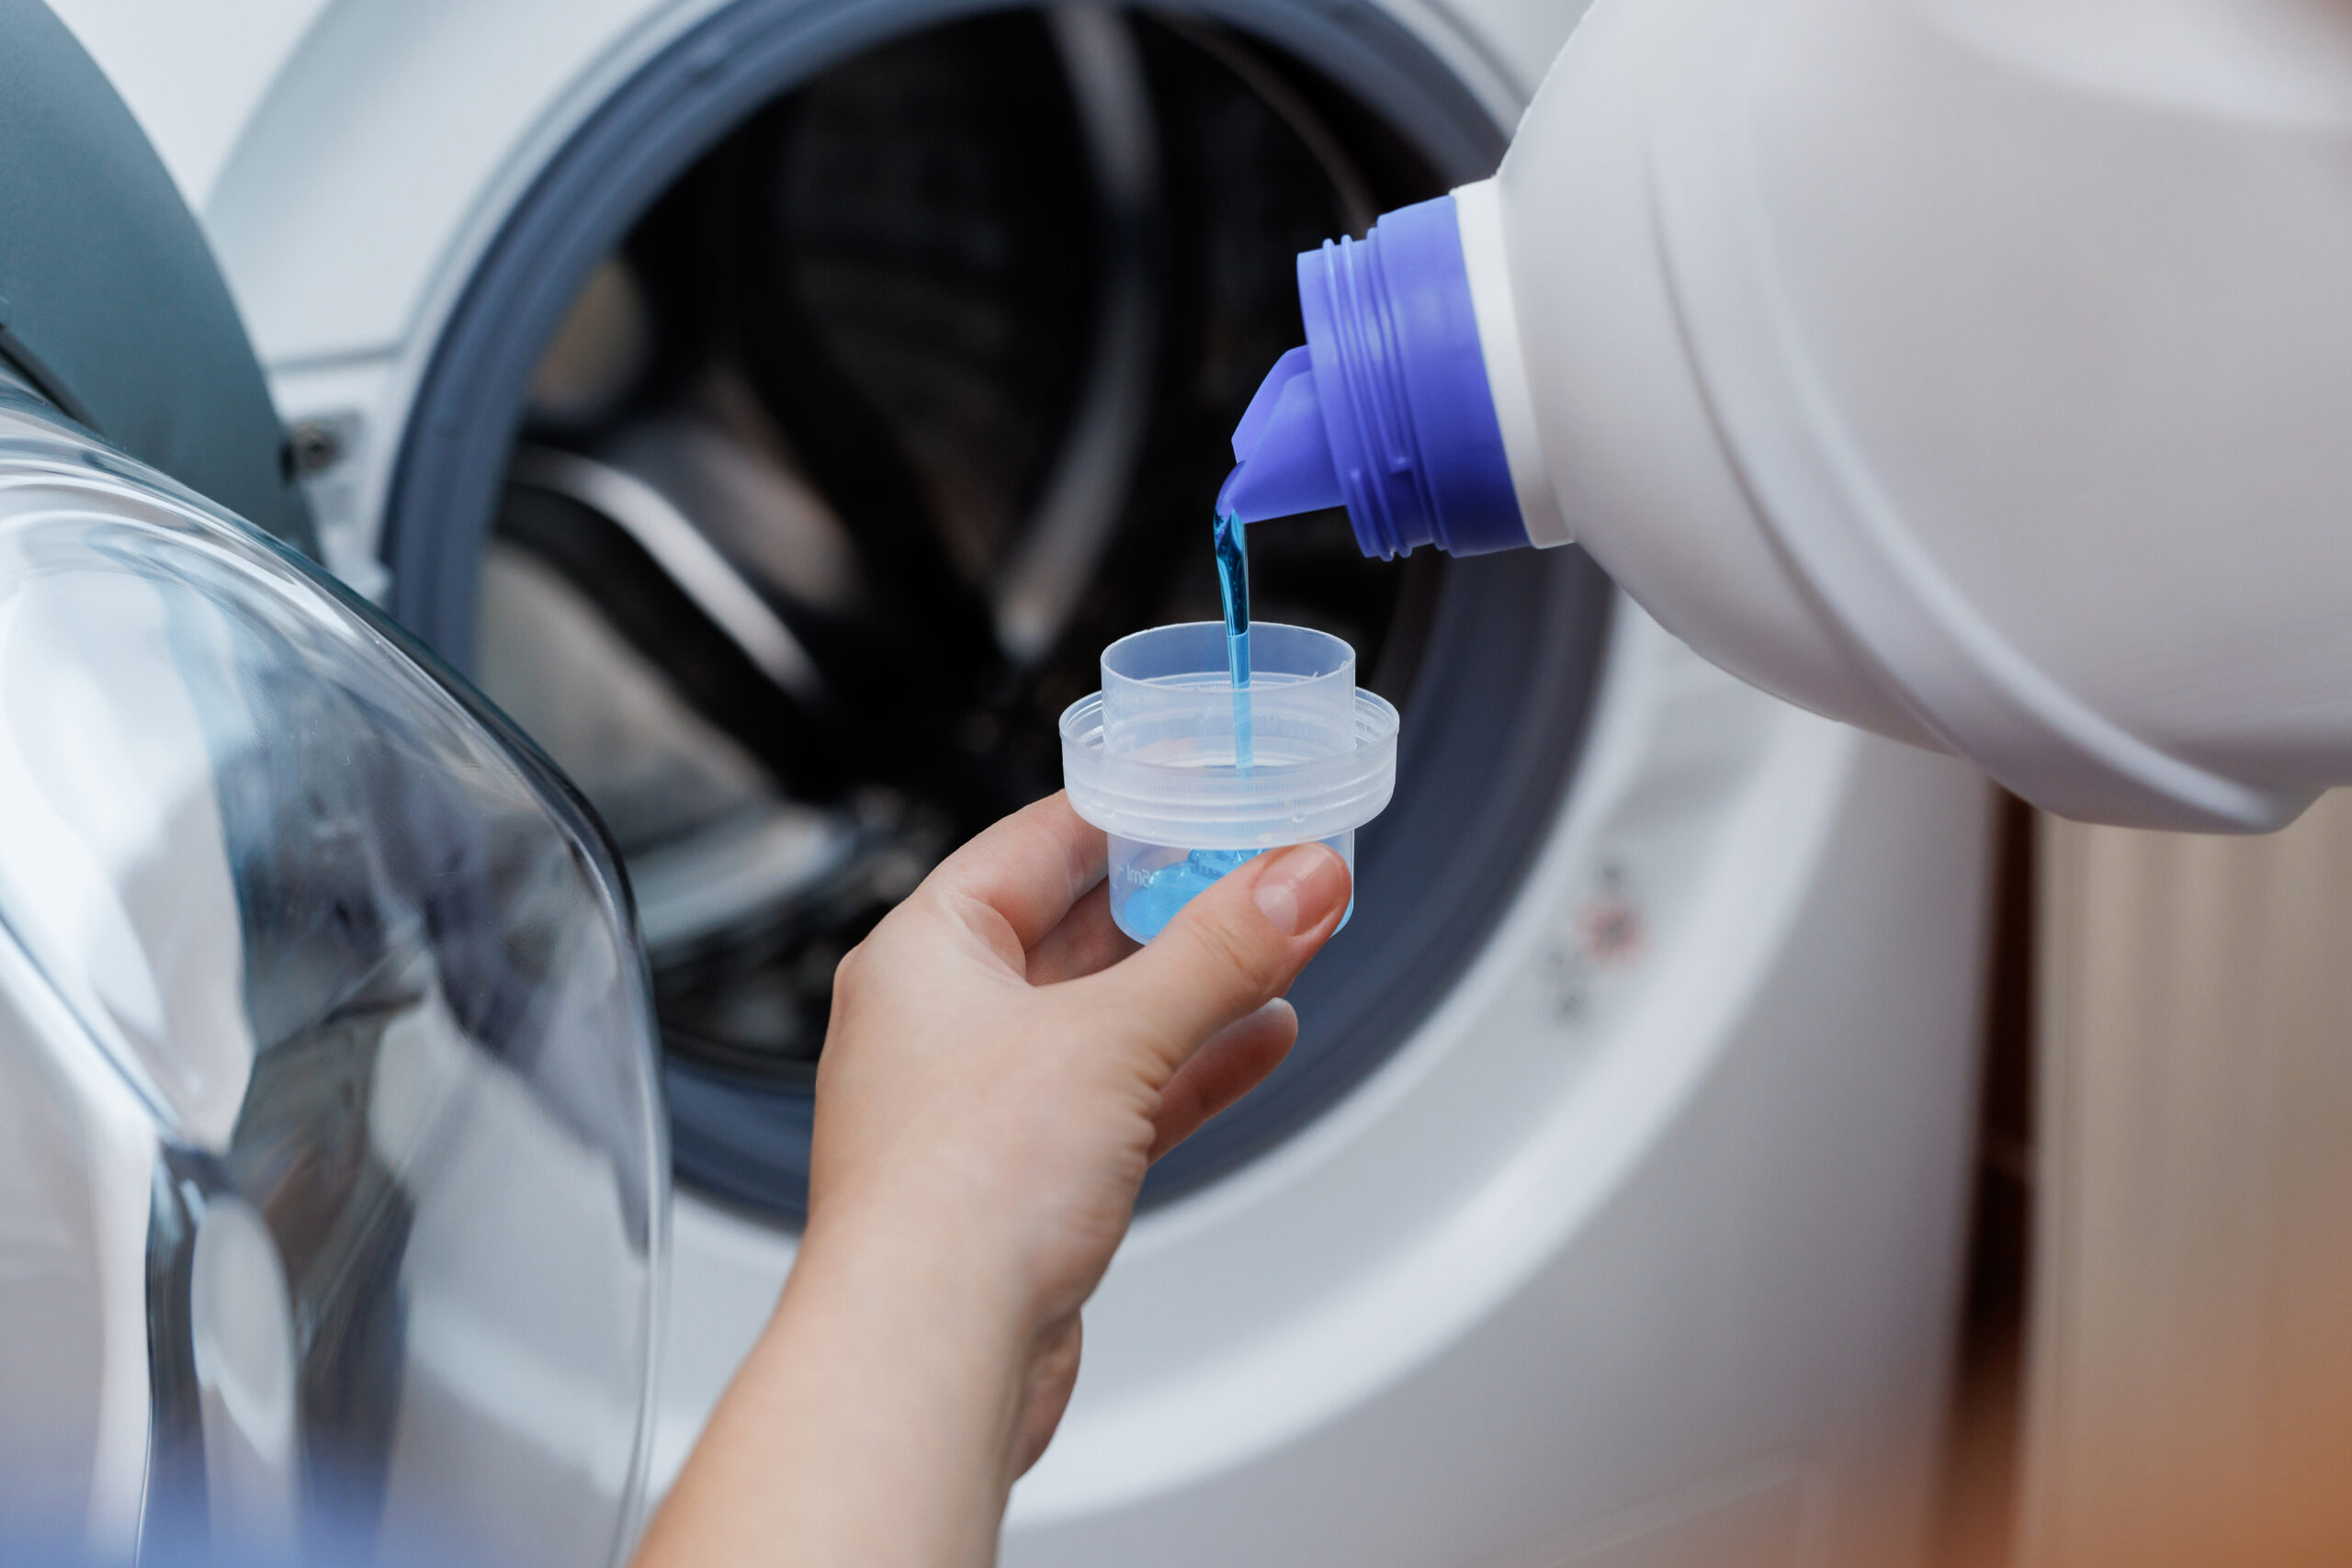 Close up shot of a woman hands squeezing liquid gel laundry detergent from a plastic bottle into a small container, with a washing machine in the background